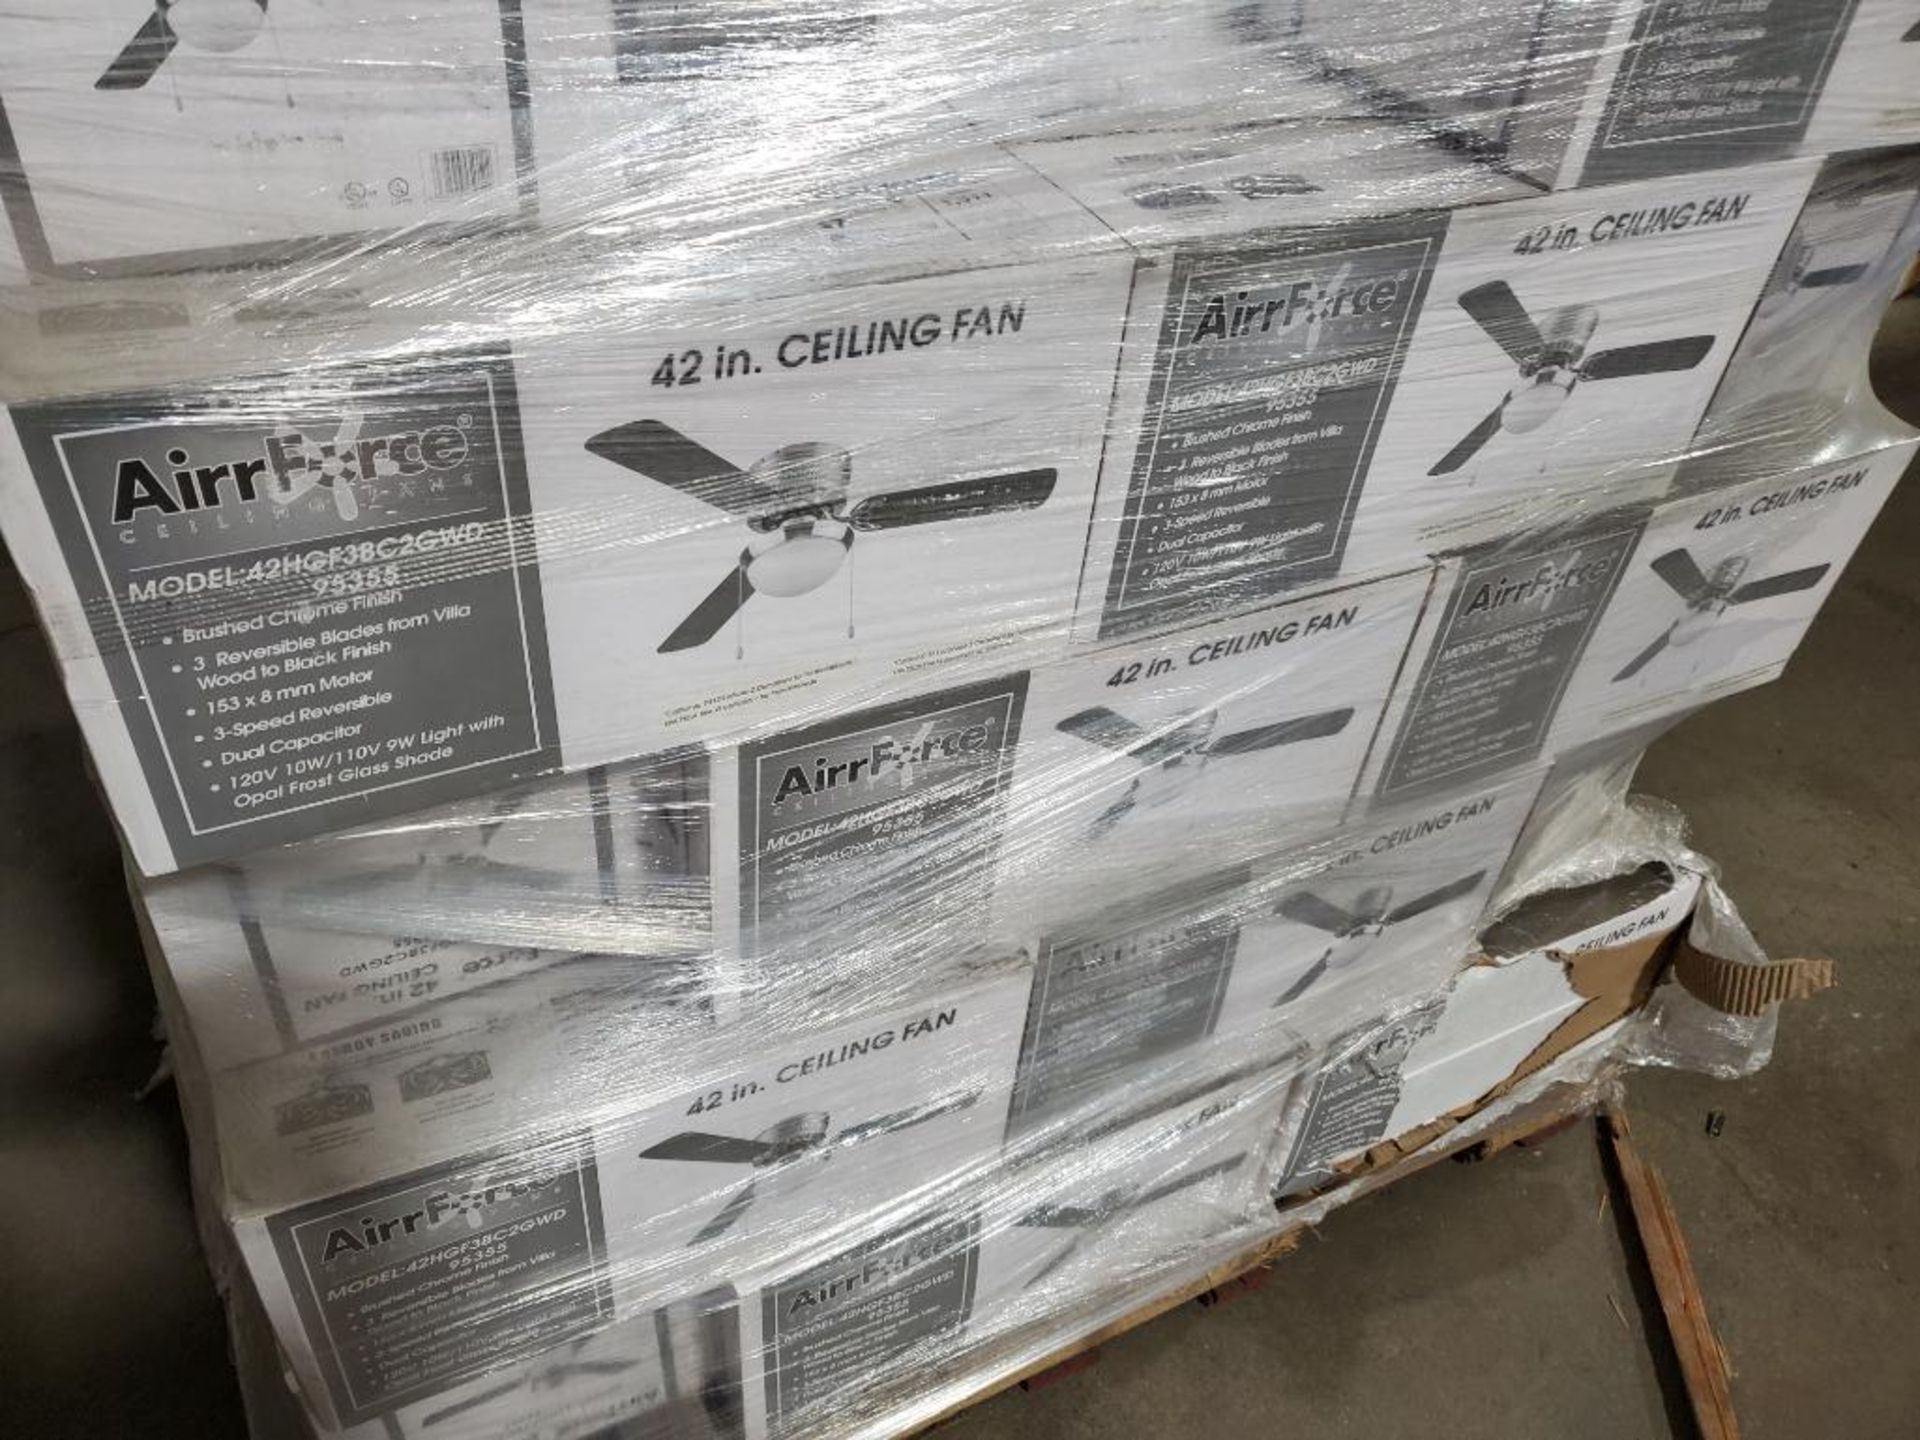 Qty 10 - AirrForce Ceiling Fans 42HGF3BC2GWD, 95355. 42 in ceiling fan. New in box. - Image 3 of 5